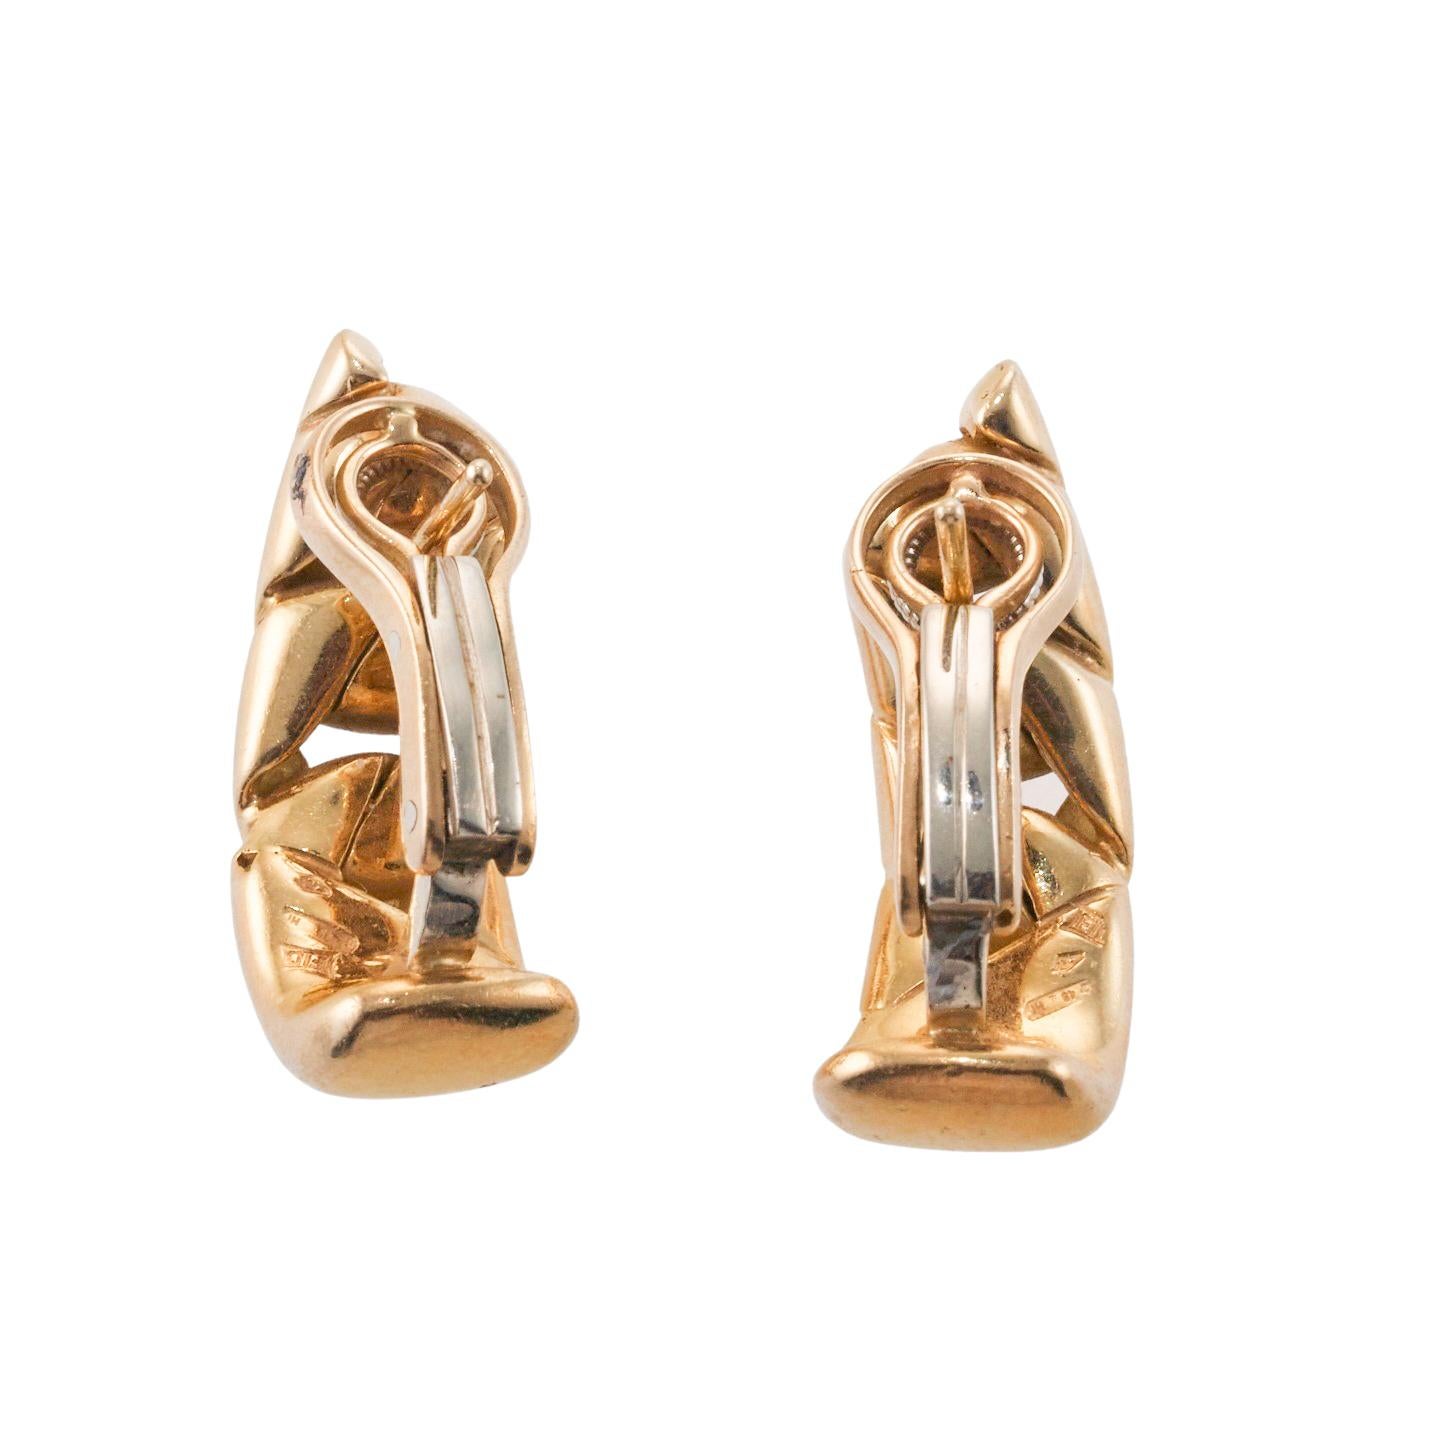 1980s Italian Gold Curb Link Earrings In Excellent Condition For Sale In New York, NY